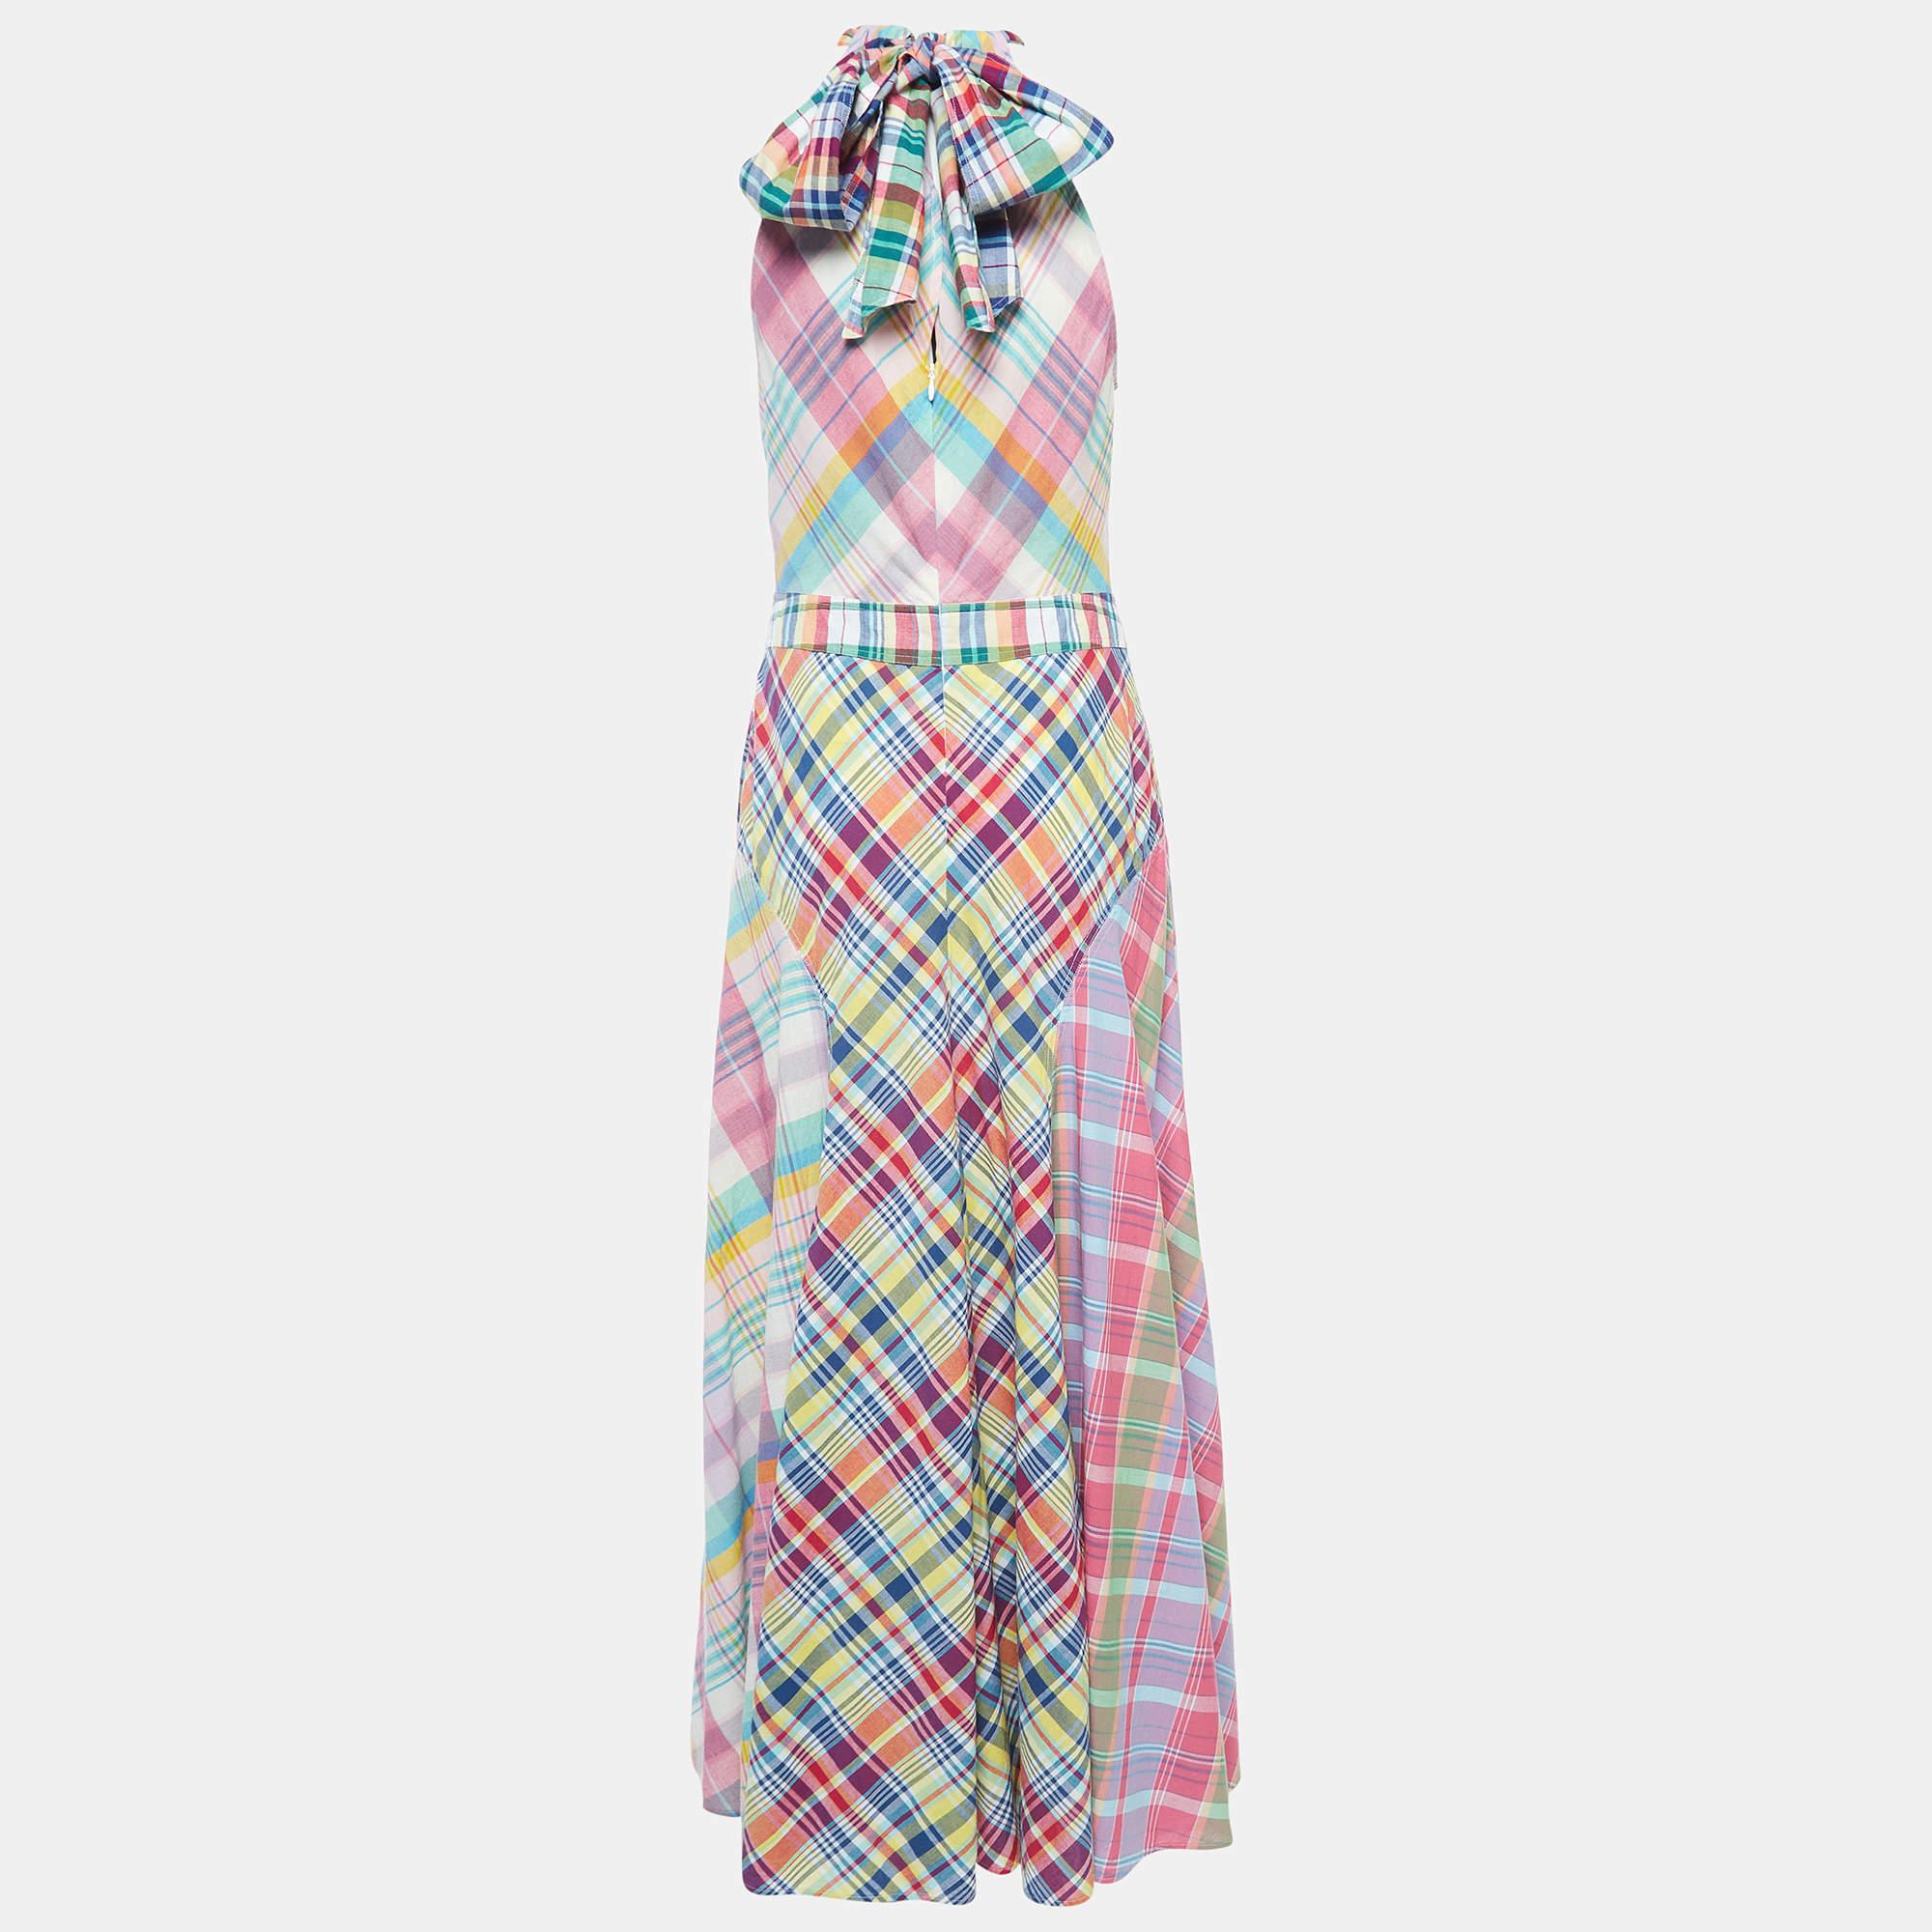 The Polo Ralph Lauren dress is a vibrant and chic summer essential. Crafted from high-quality cotton, its playful multicolored check pattern exudes a timeless charm. The halterneck design adds a touch of sophistication, making it a perfect blend of